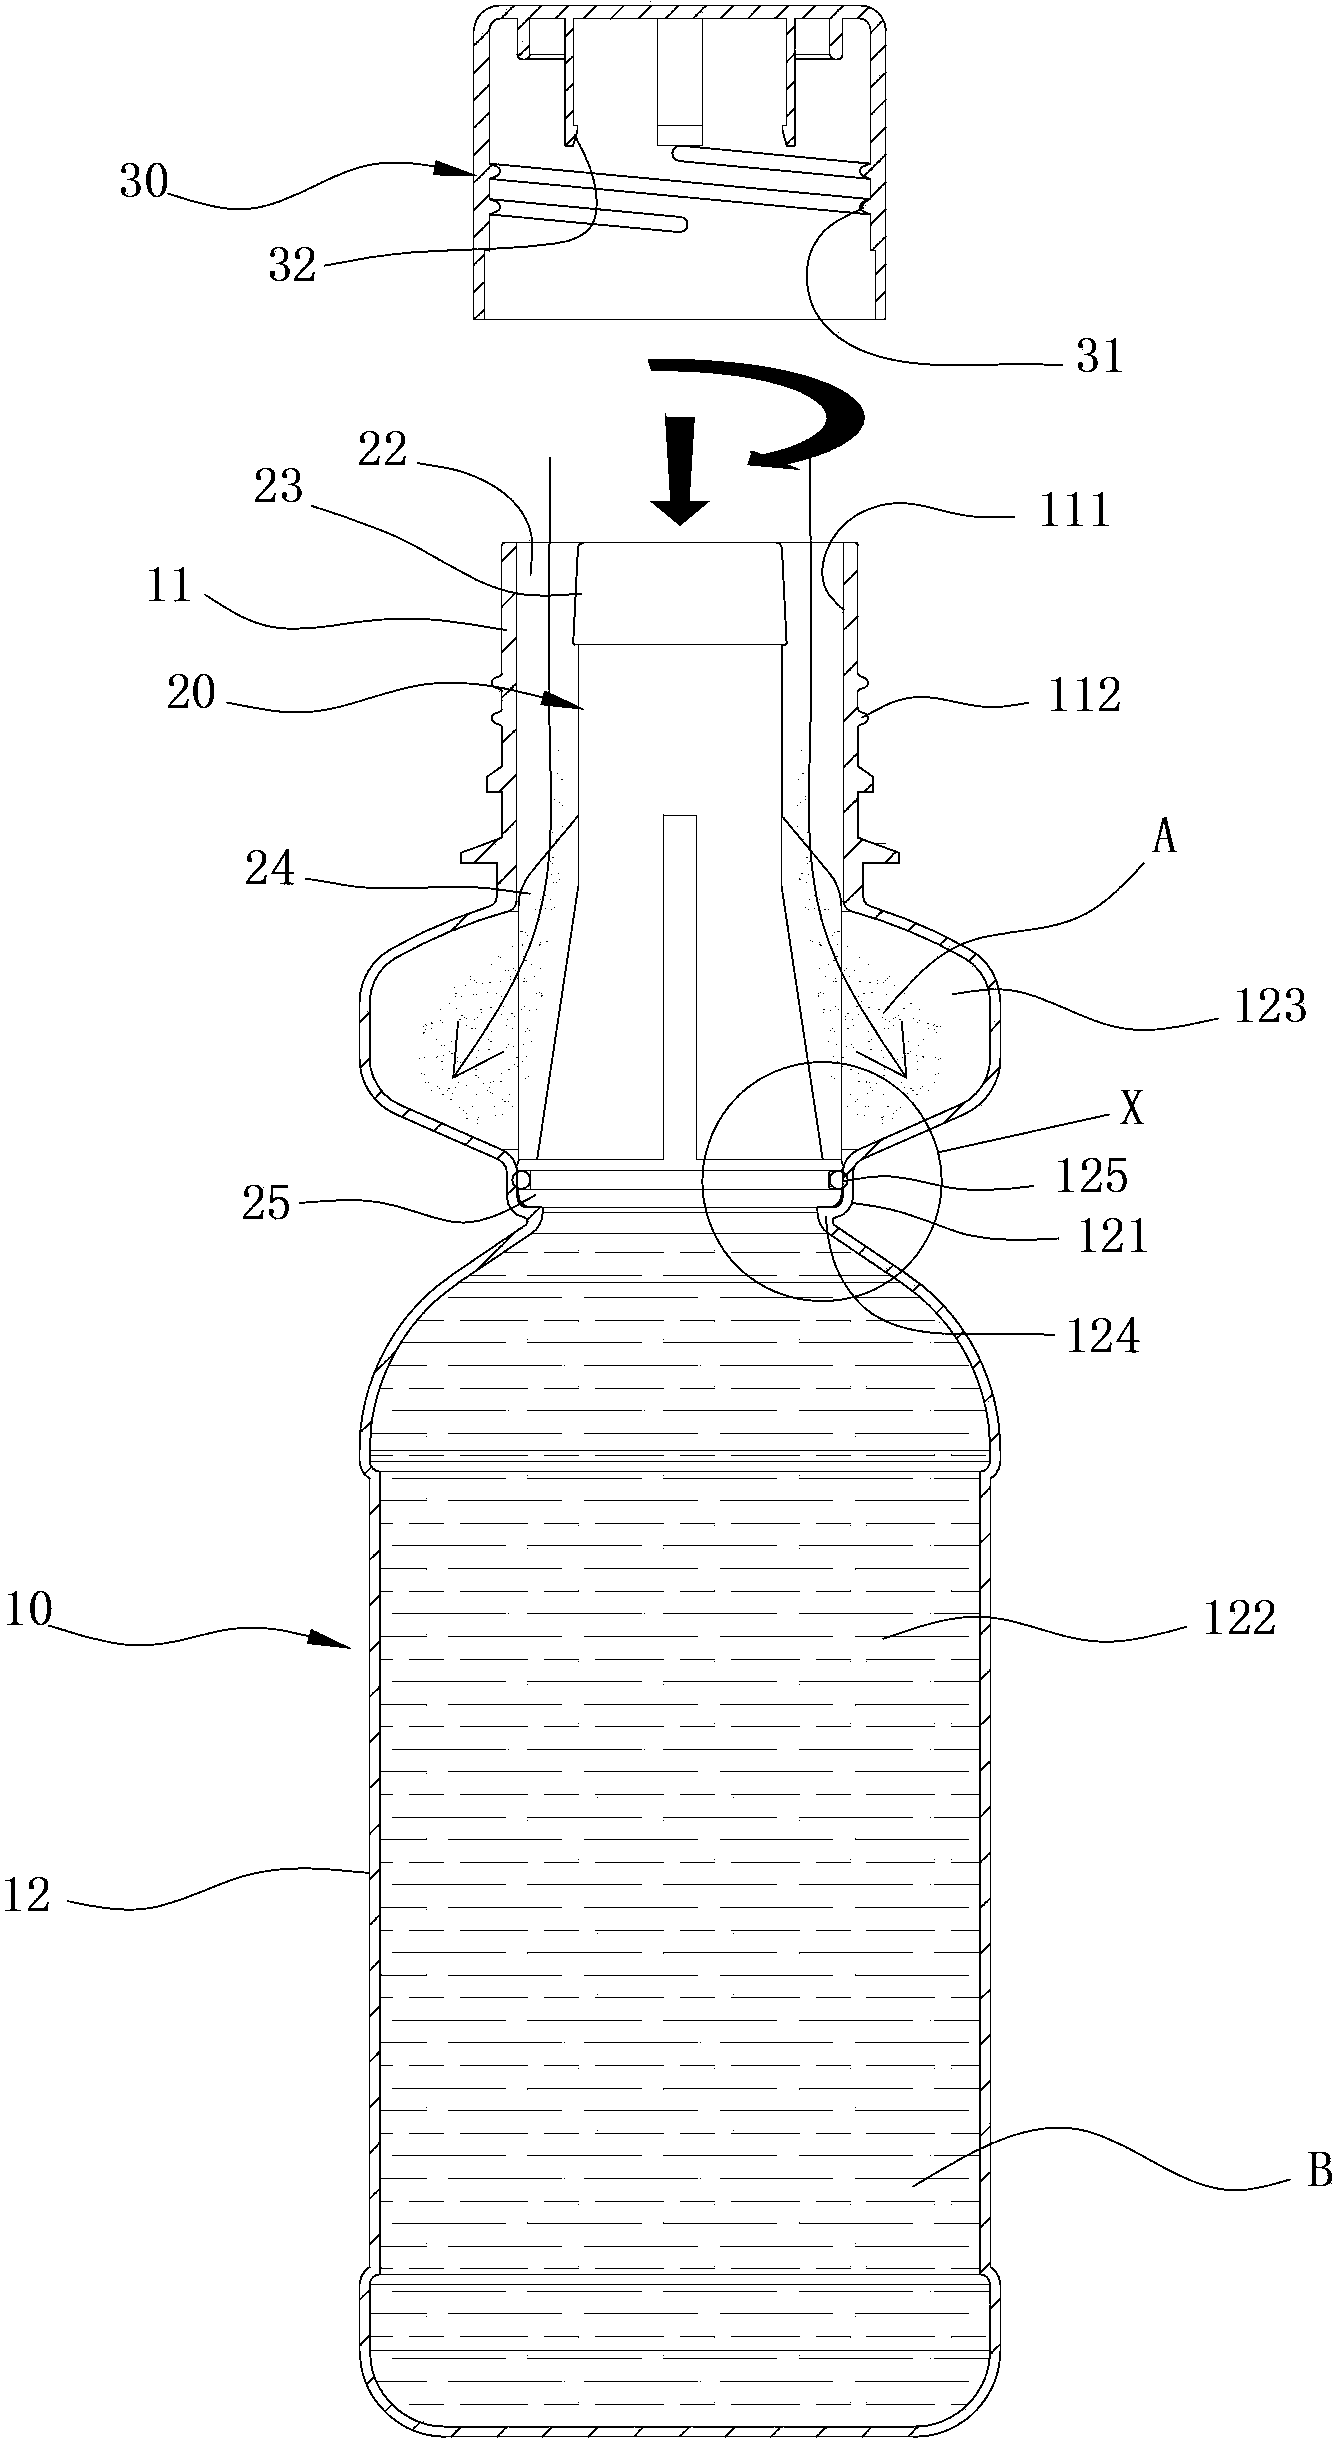 Mixing and filling bottle assembly